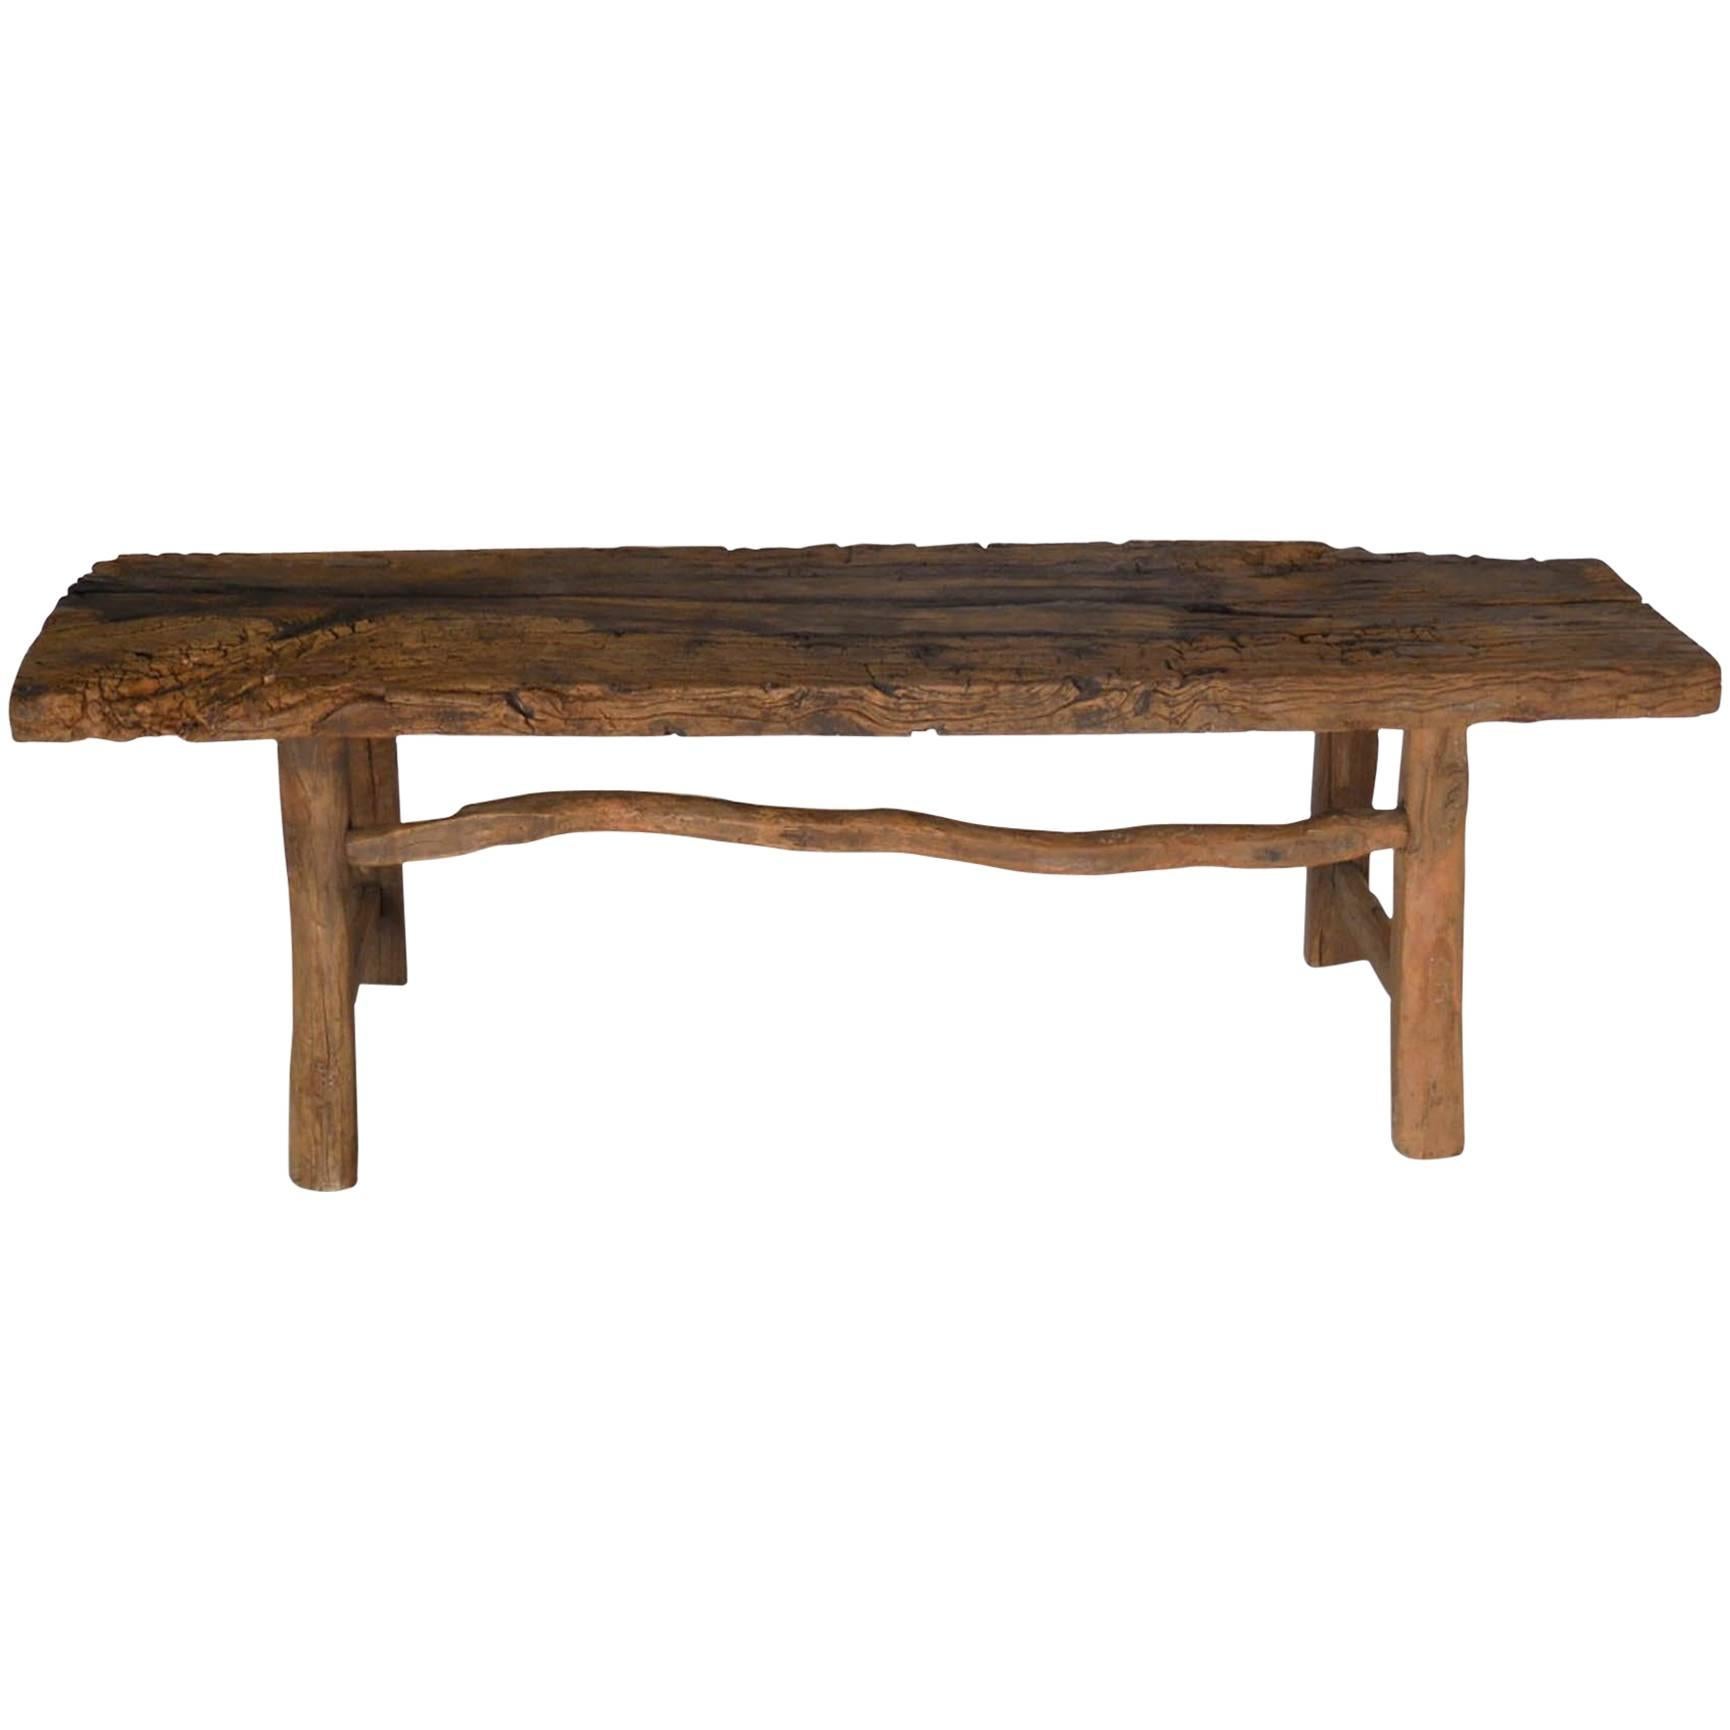 Early Chestnut Bench with Branch Stretcher